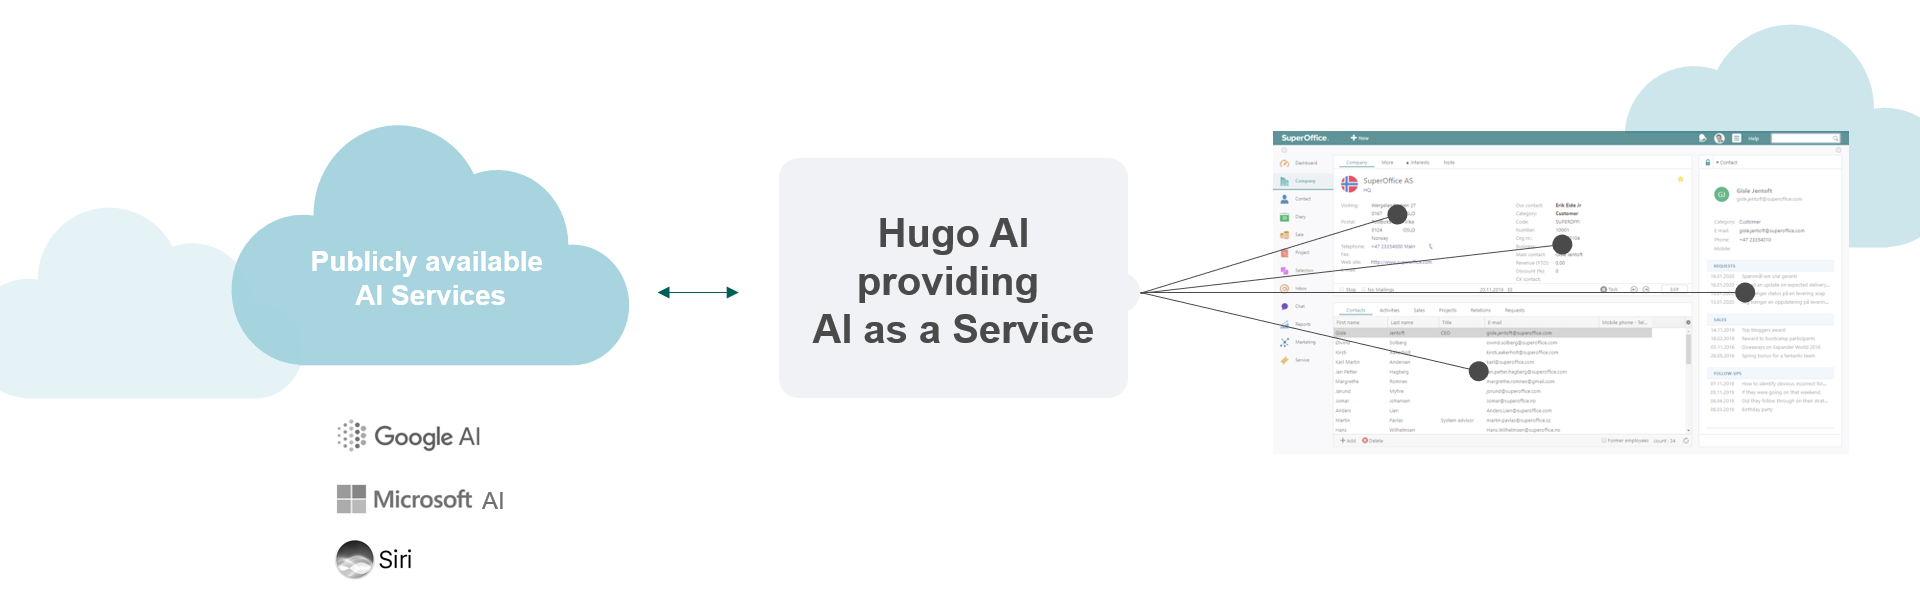 ai-as-a-service.png